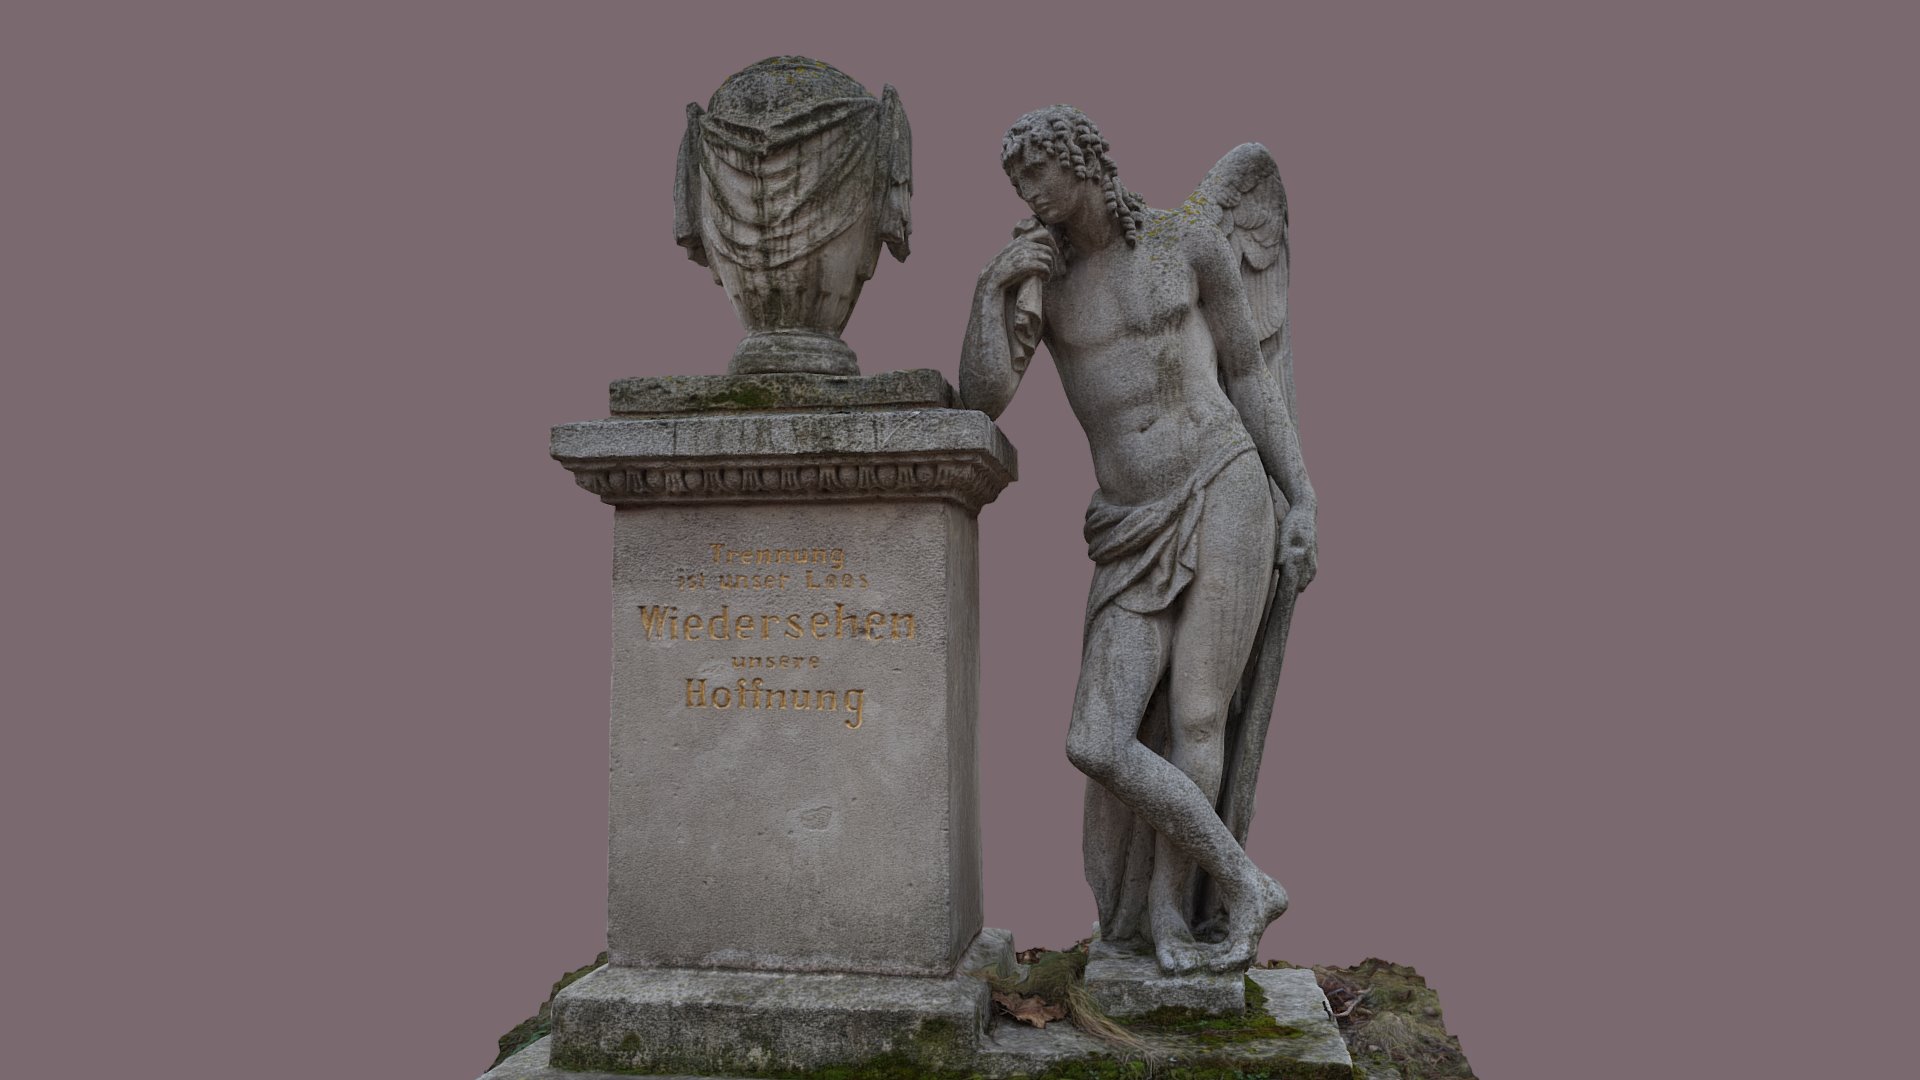 3D model Hoffnung - This is a 3D model of the Hoffnung. The 3D model is about a statue of a man and a woman.